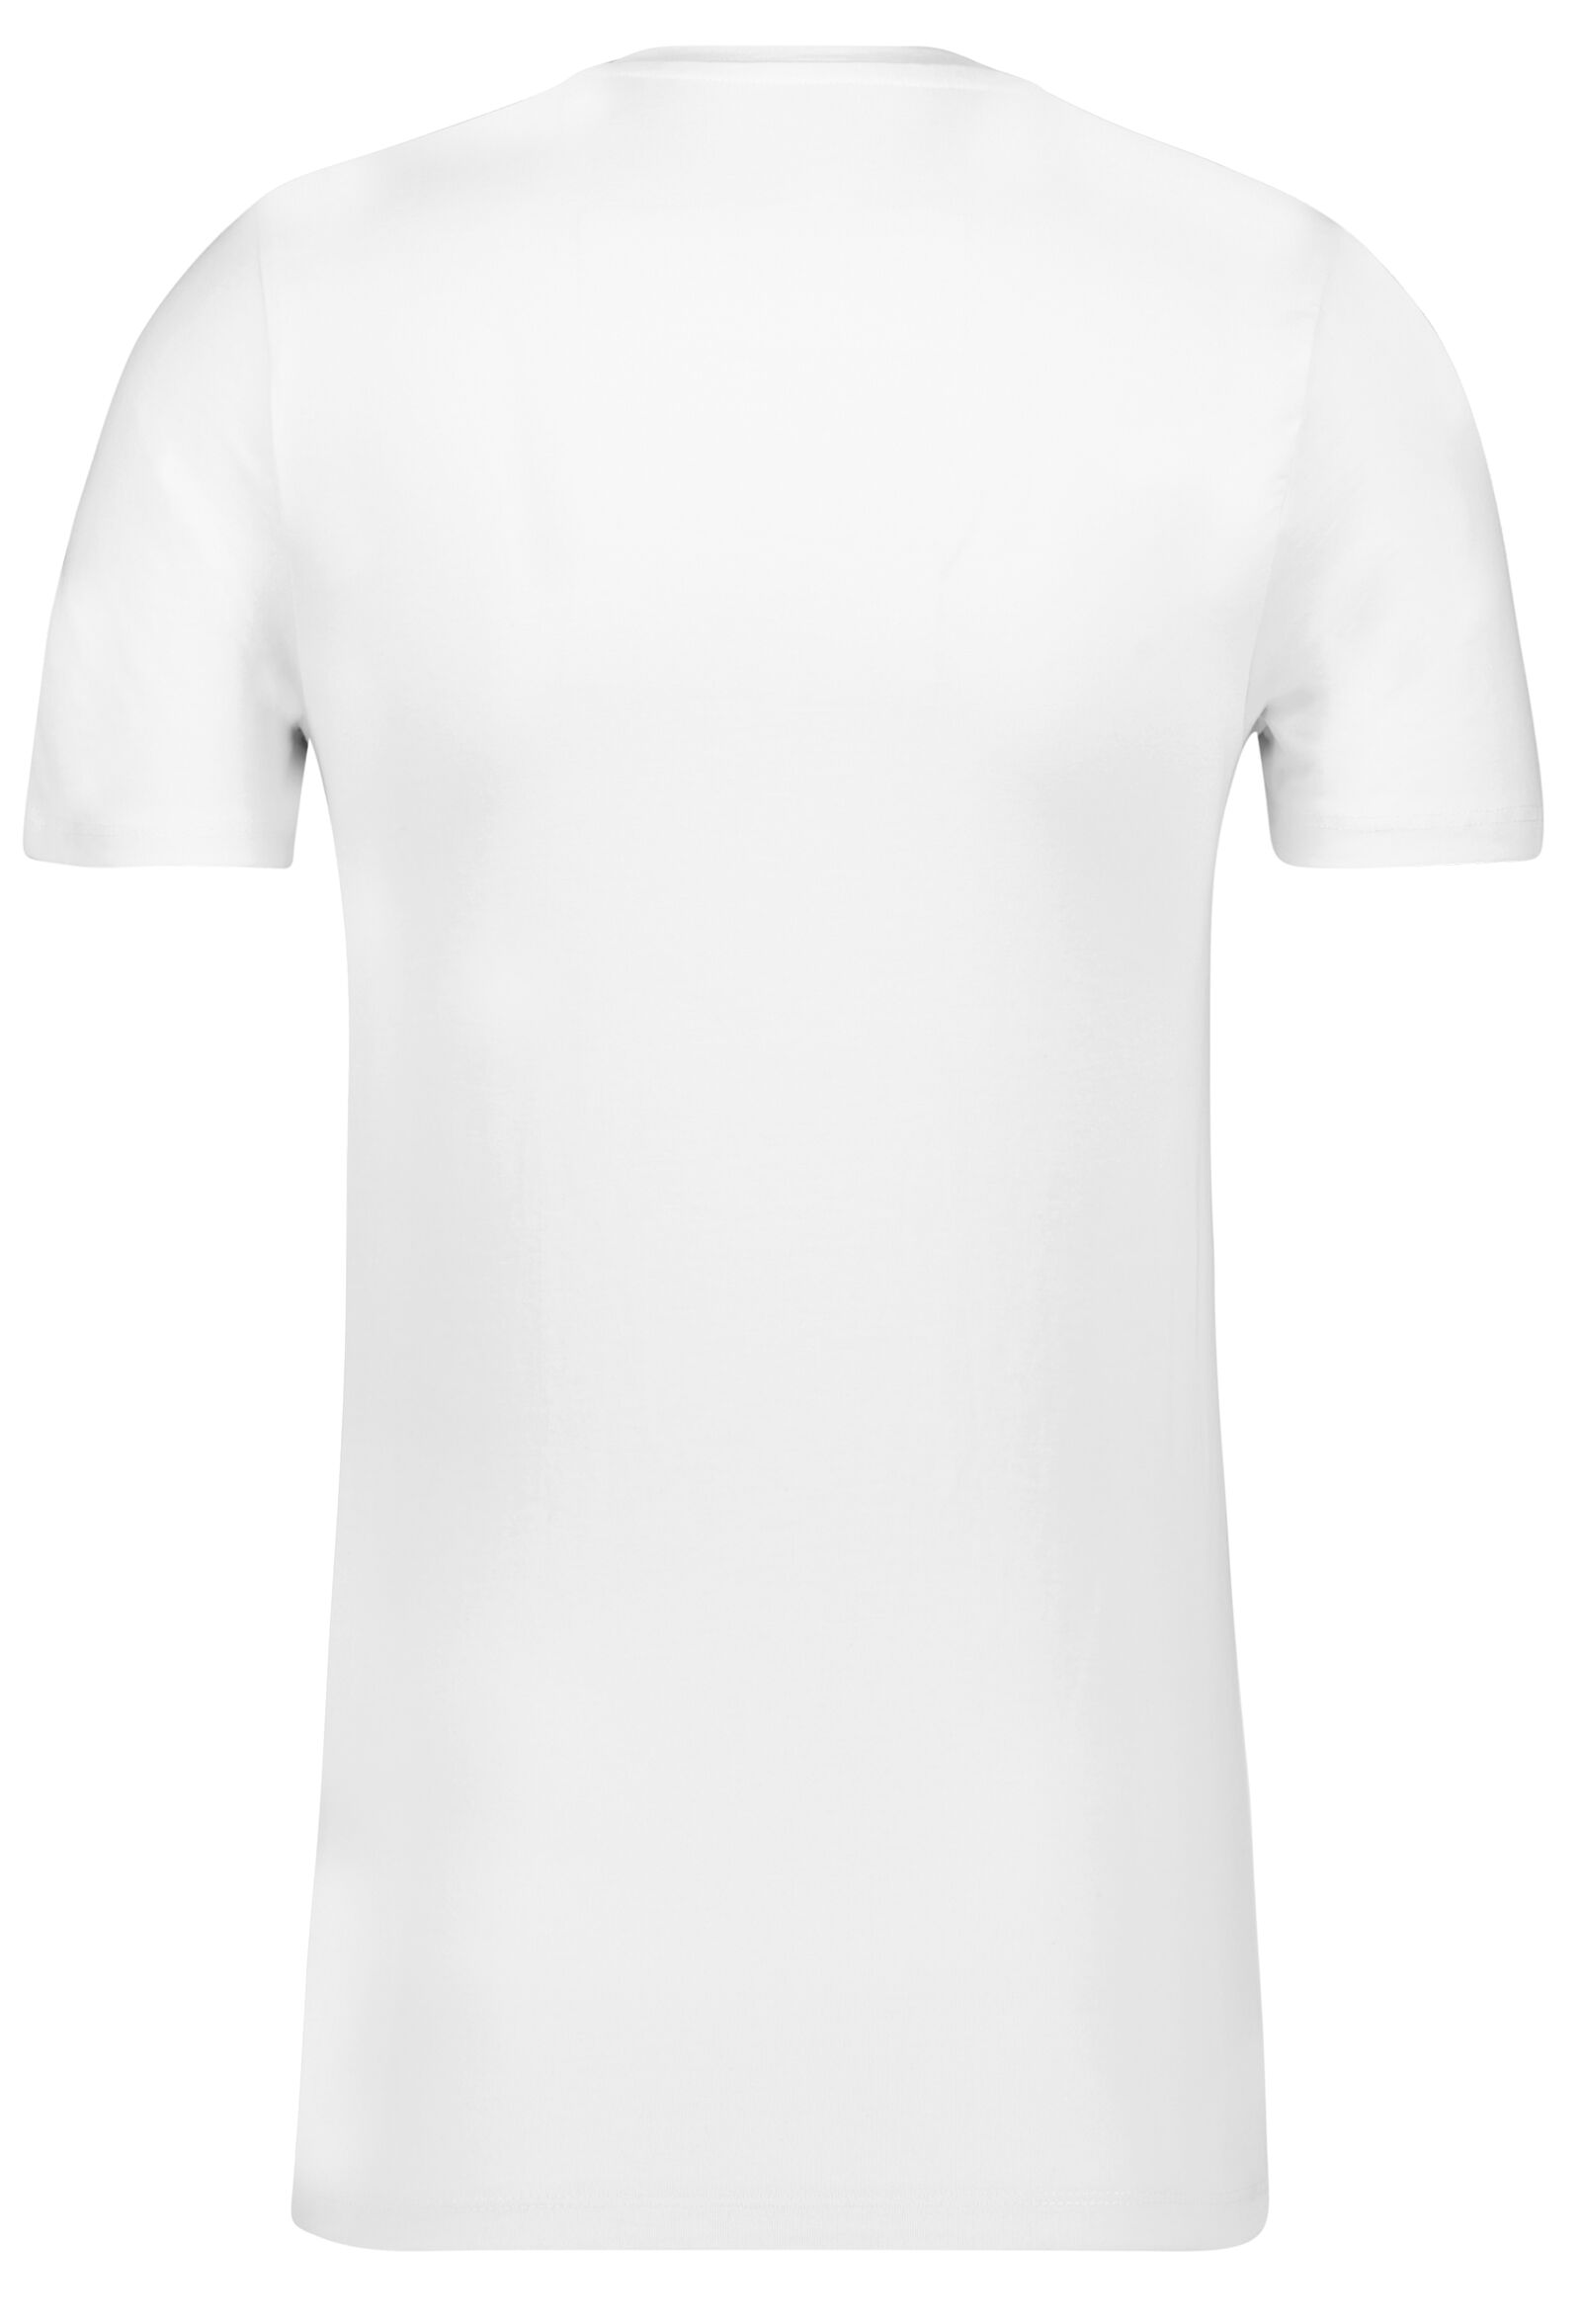 2 t-shirts homme regular fit col rond extra long blanc S - 34277063 - HEMA